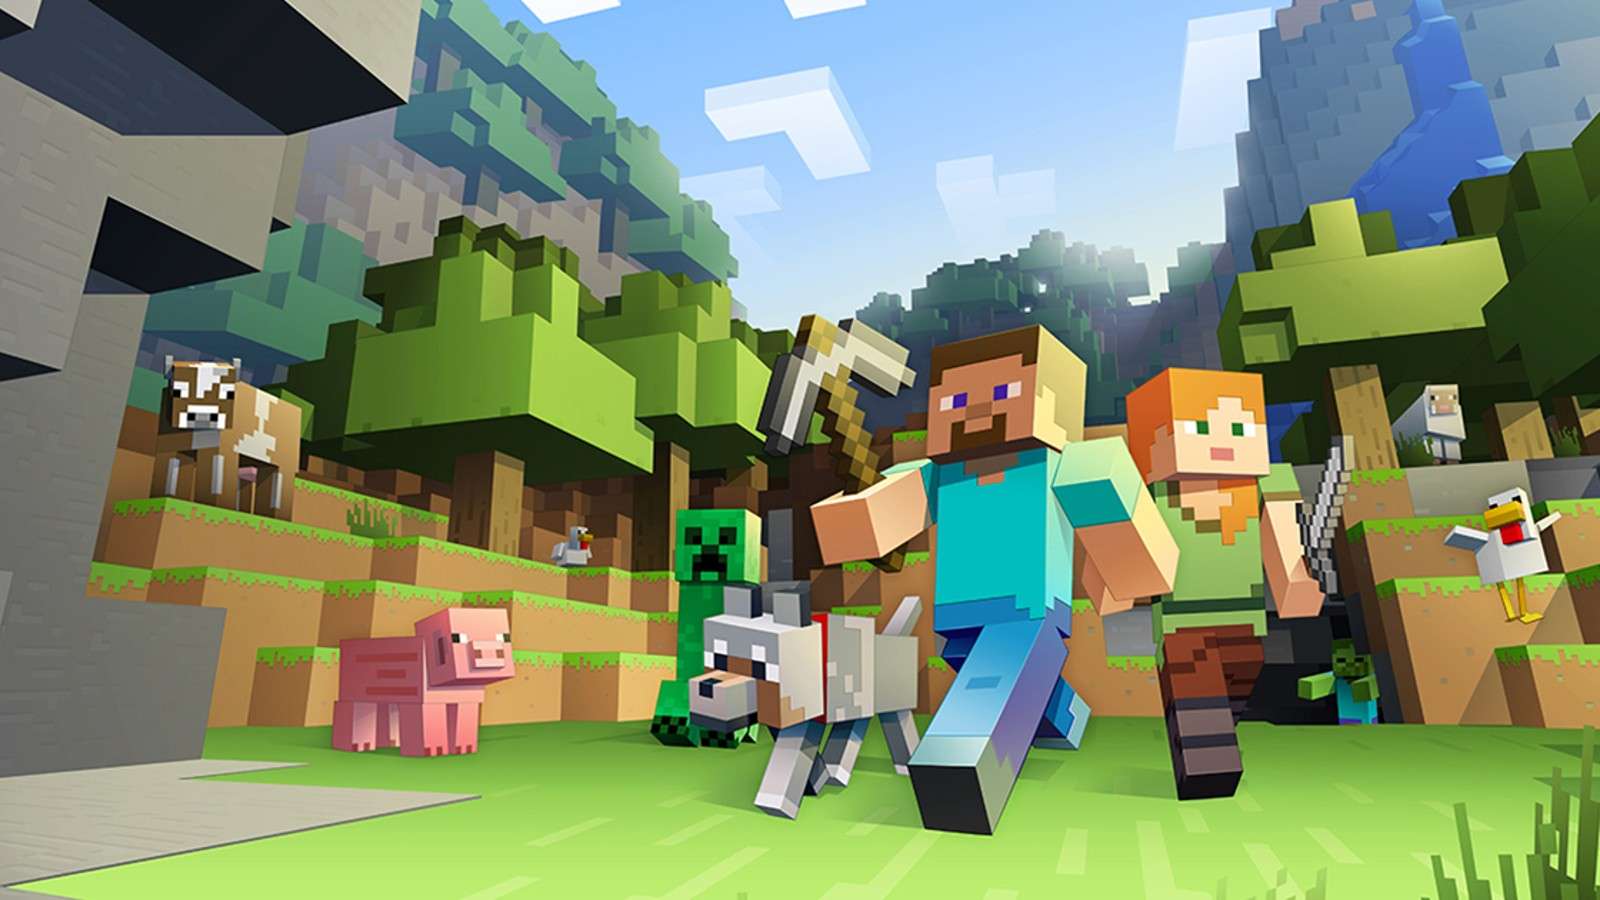 An image of Minecraft characters.